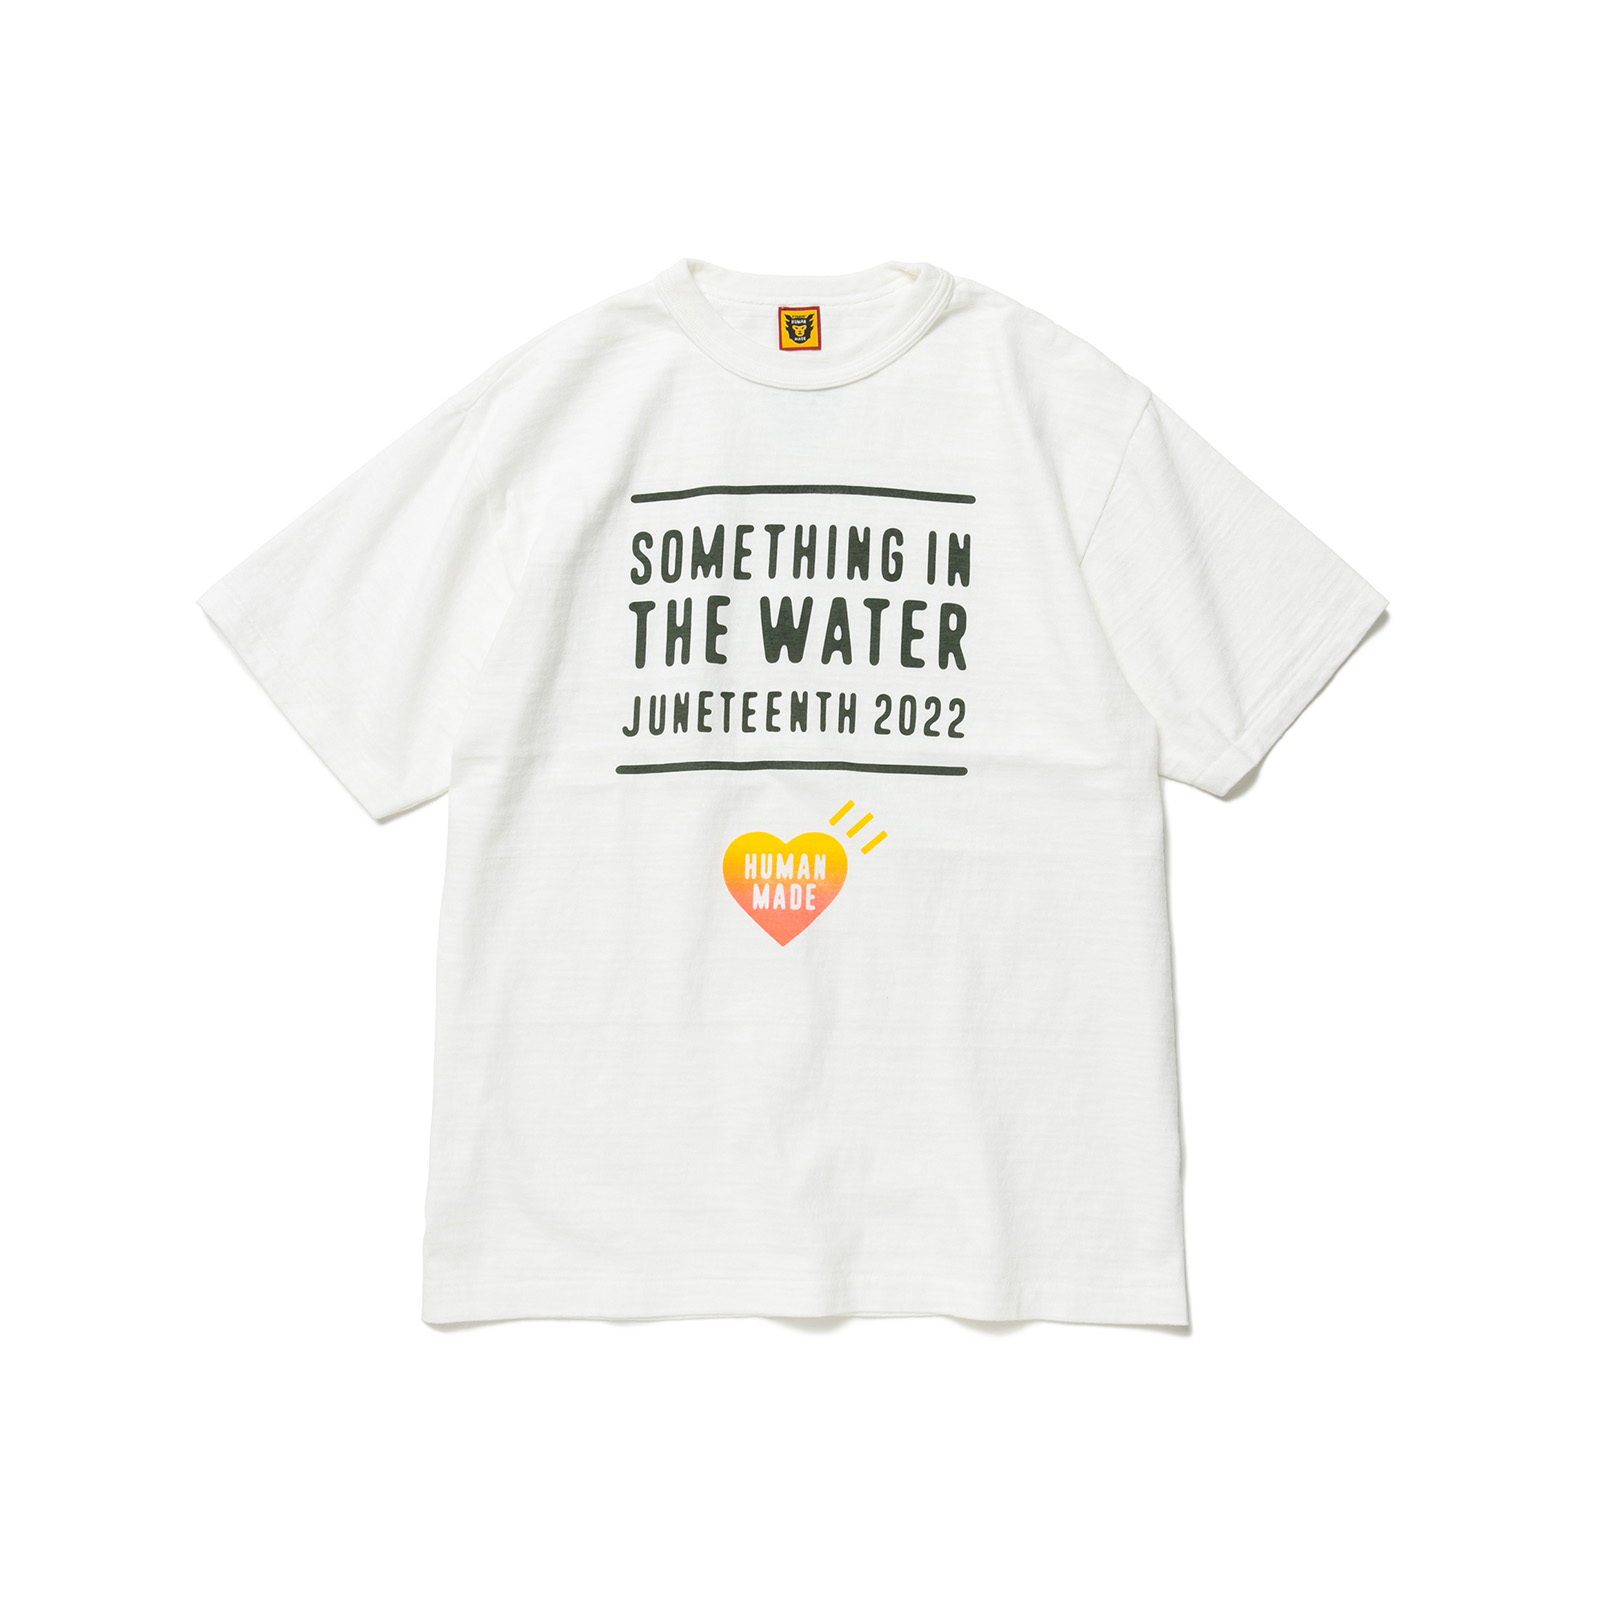 SOMETHING IN THE WATER T-SHIRT